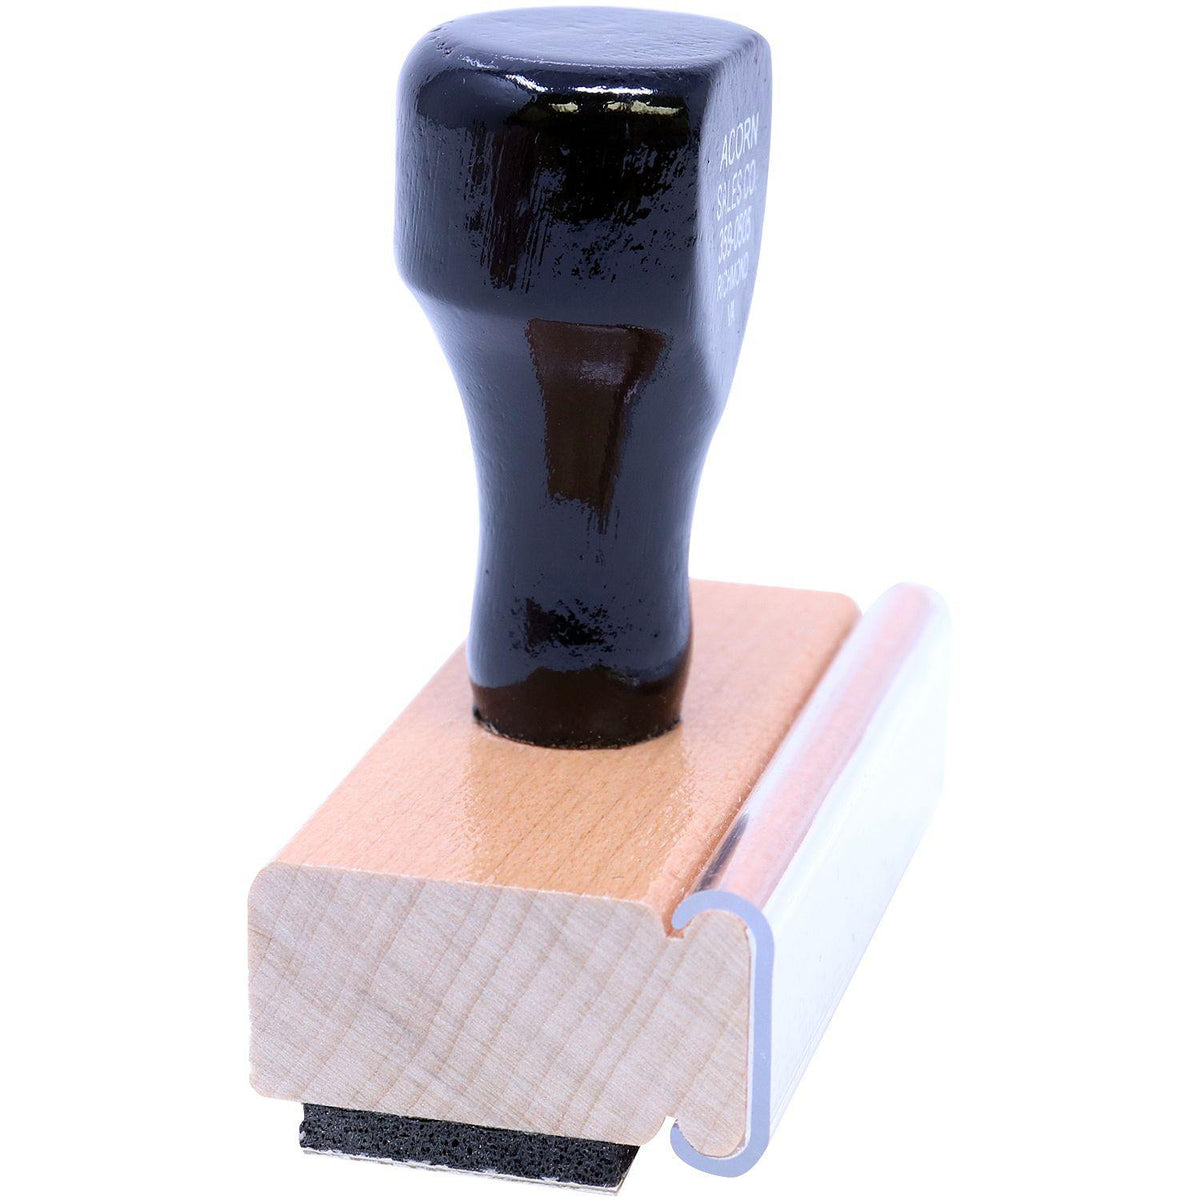 Large Stay Safe Stay Healthy Rubber Stamp - Engineer Seal Stamps - Brand_Acorn, Impression Size_Large, Stamp Type_Regular Stamp, Type of Use_General, Type of Use_Medical Office